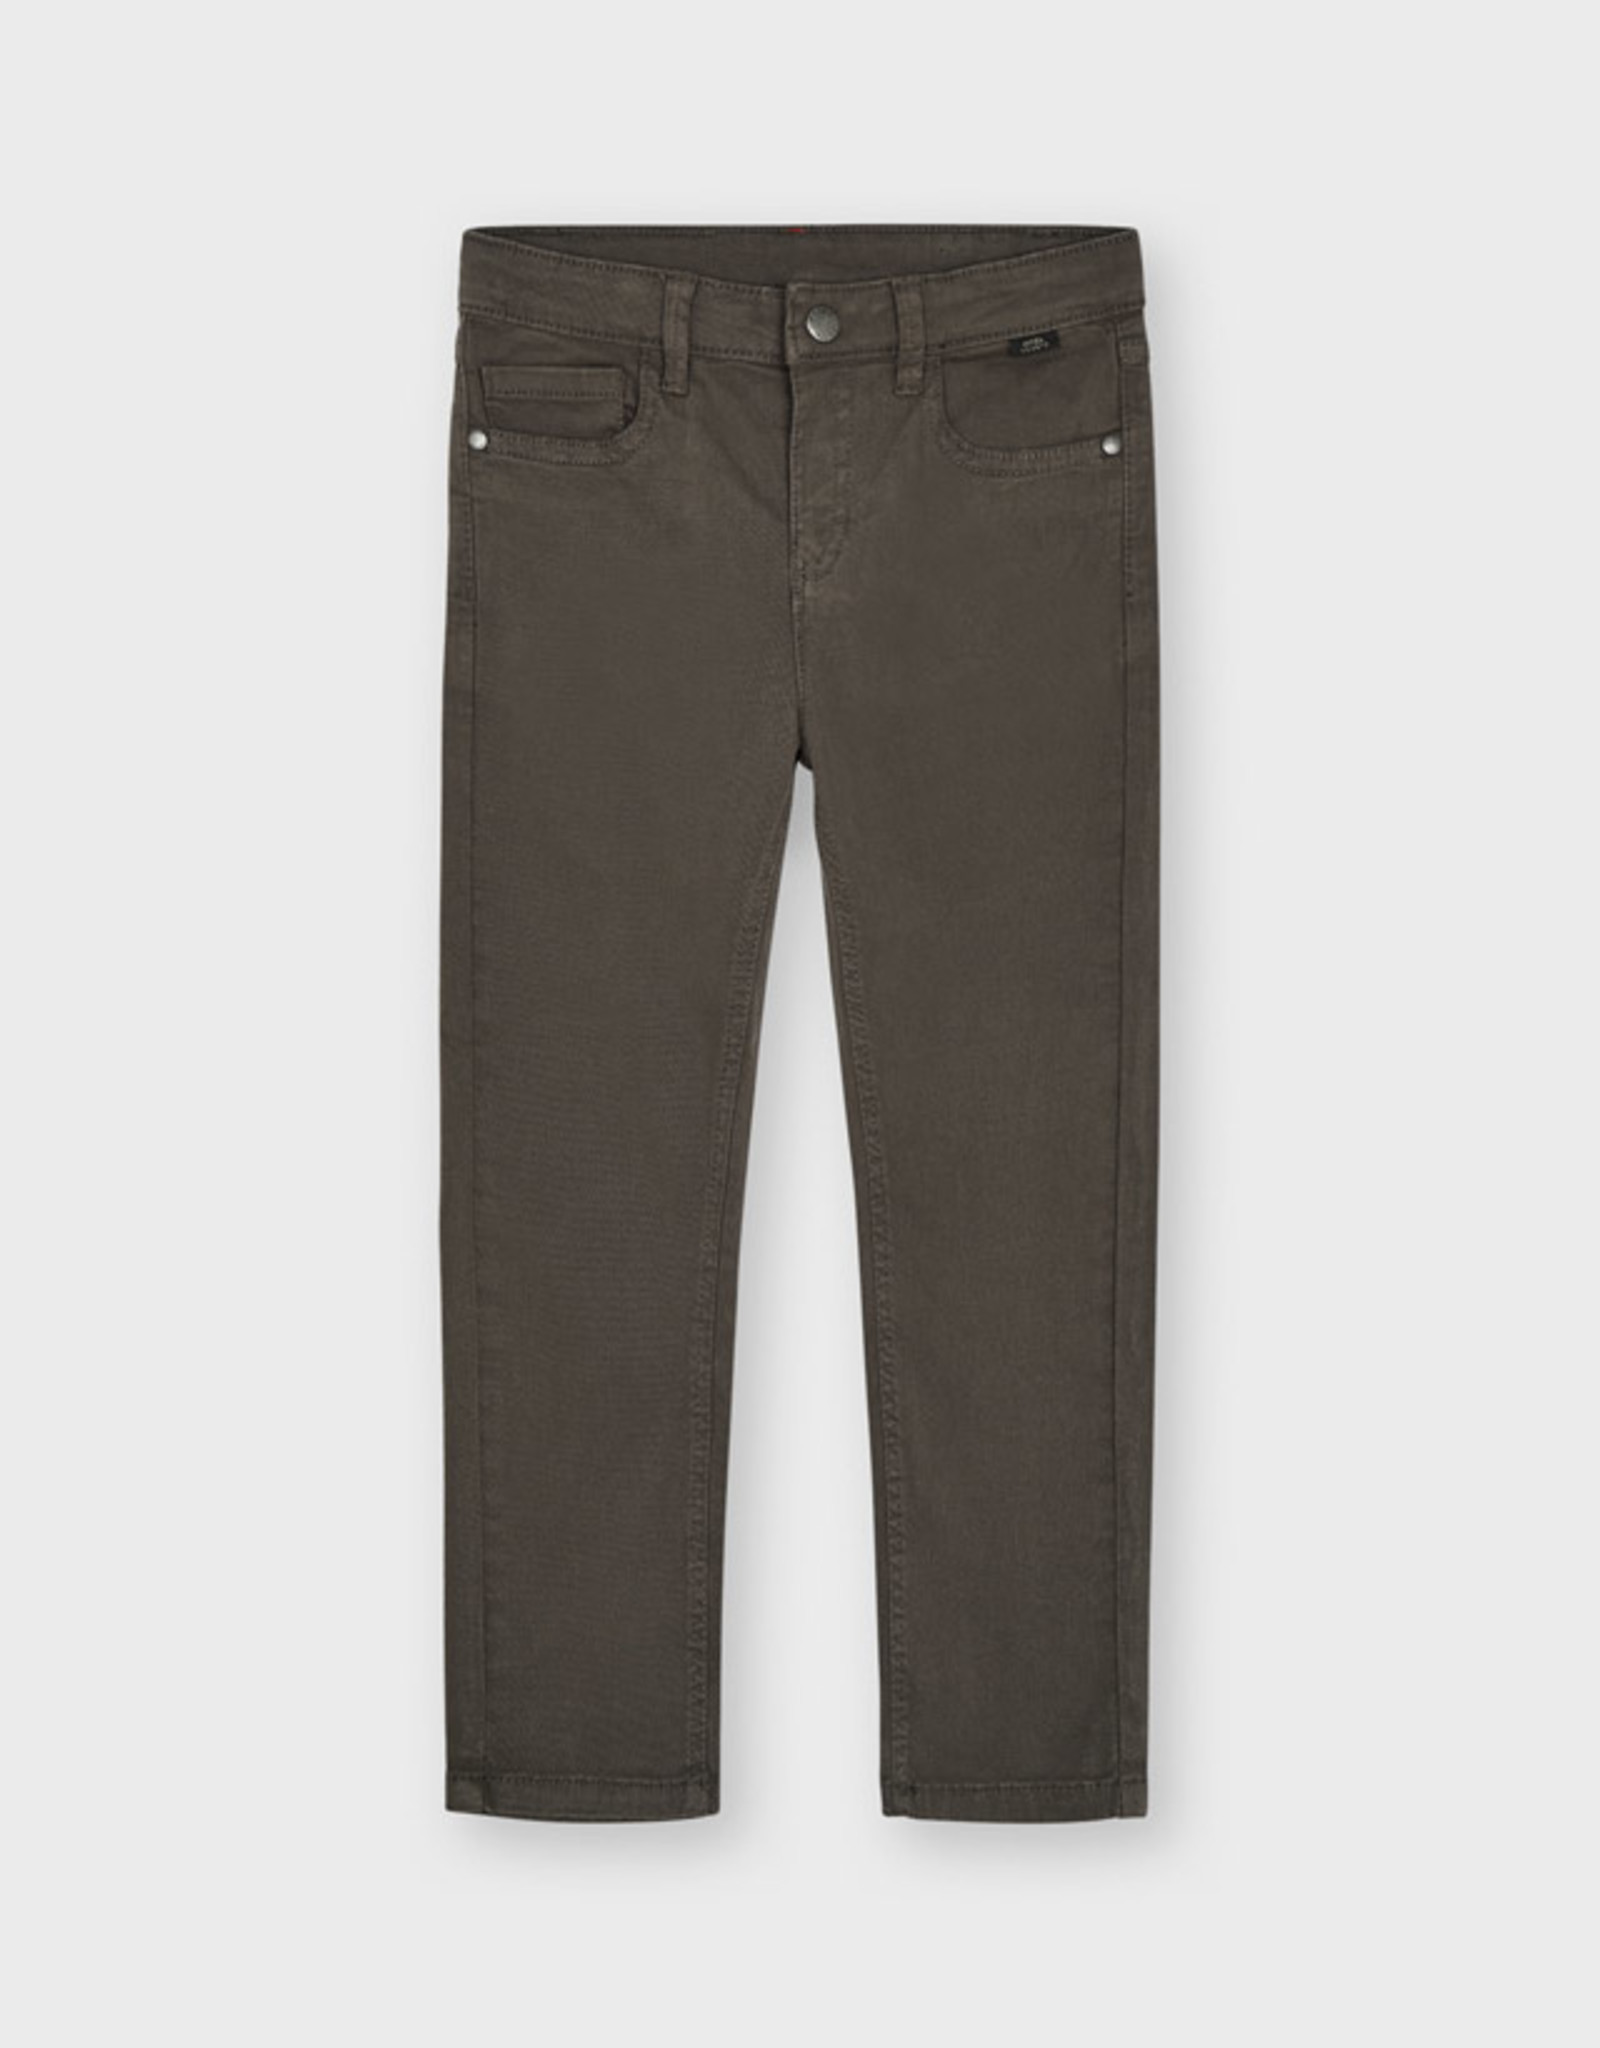 Mayoral Charlie Classic Fit Pant